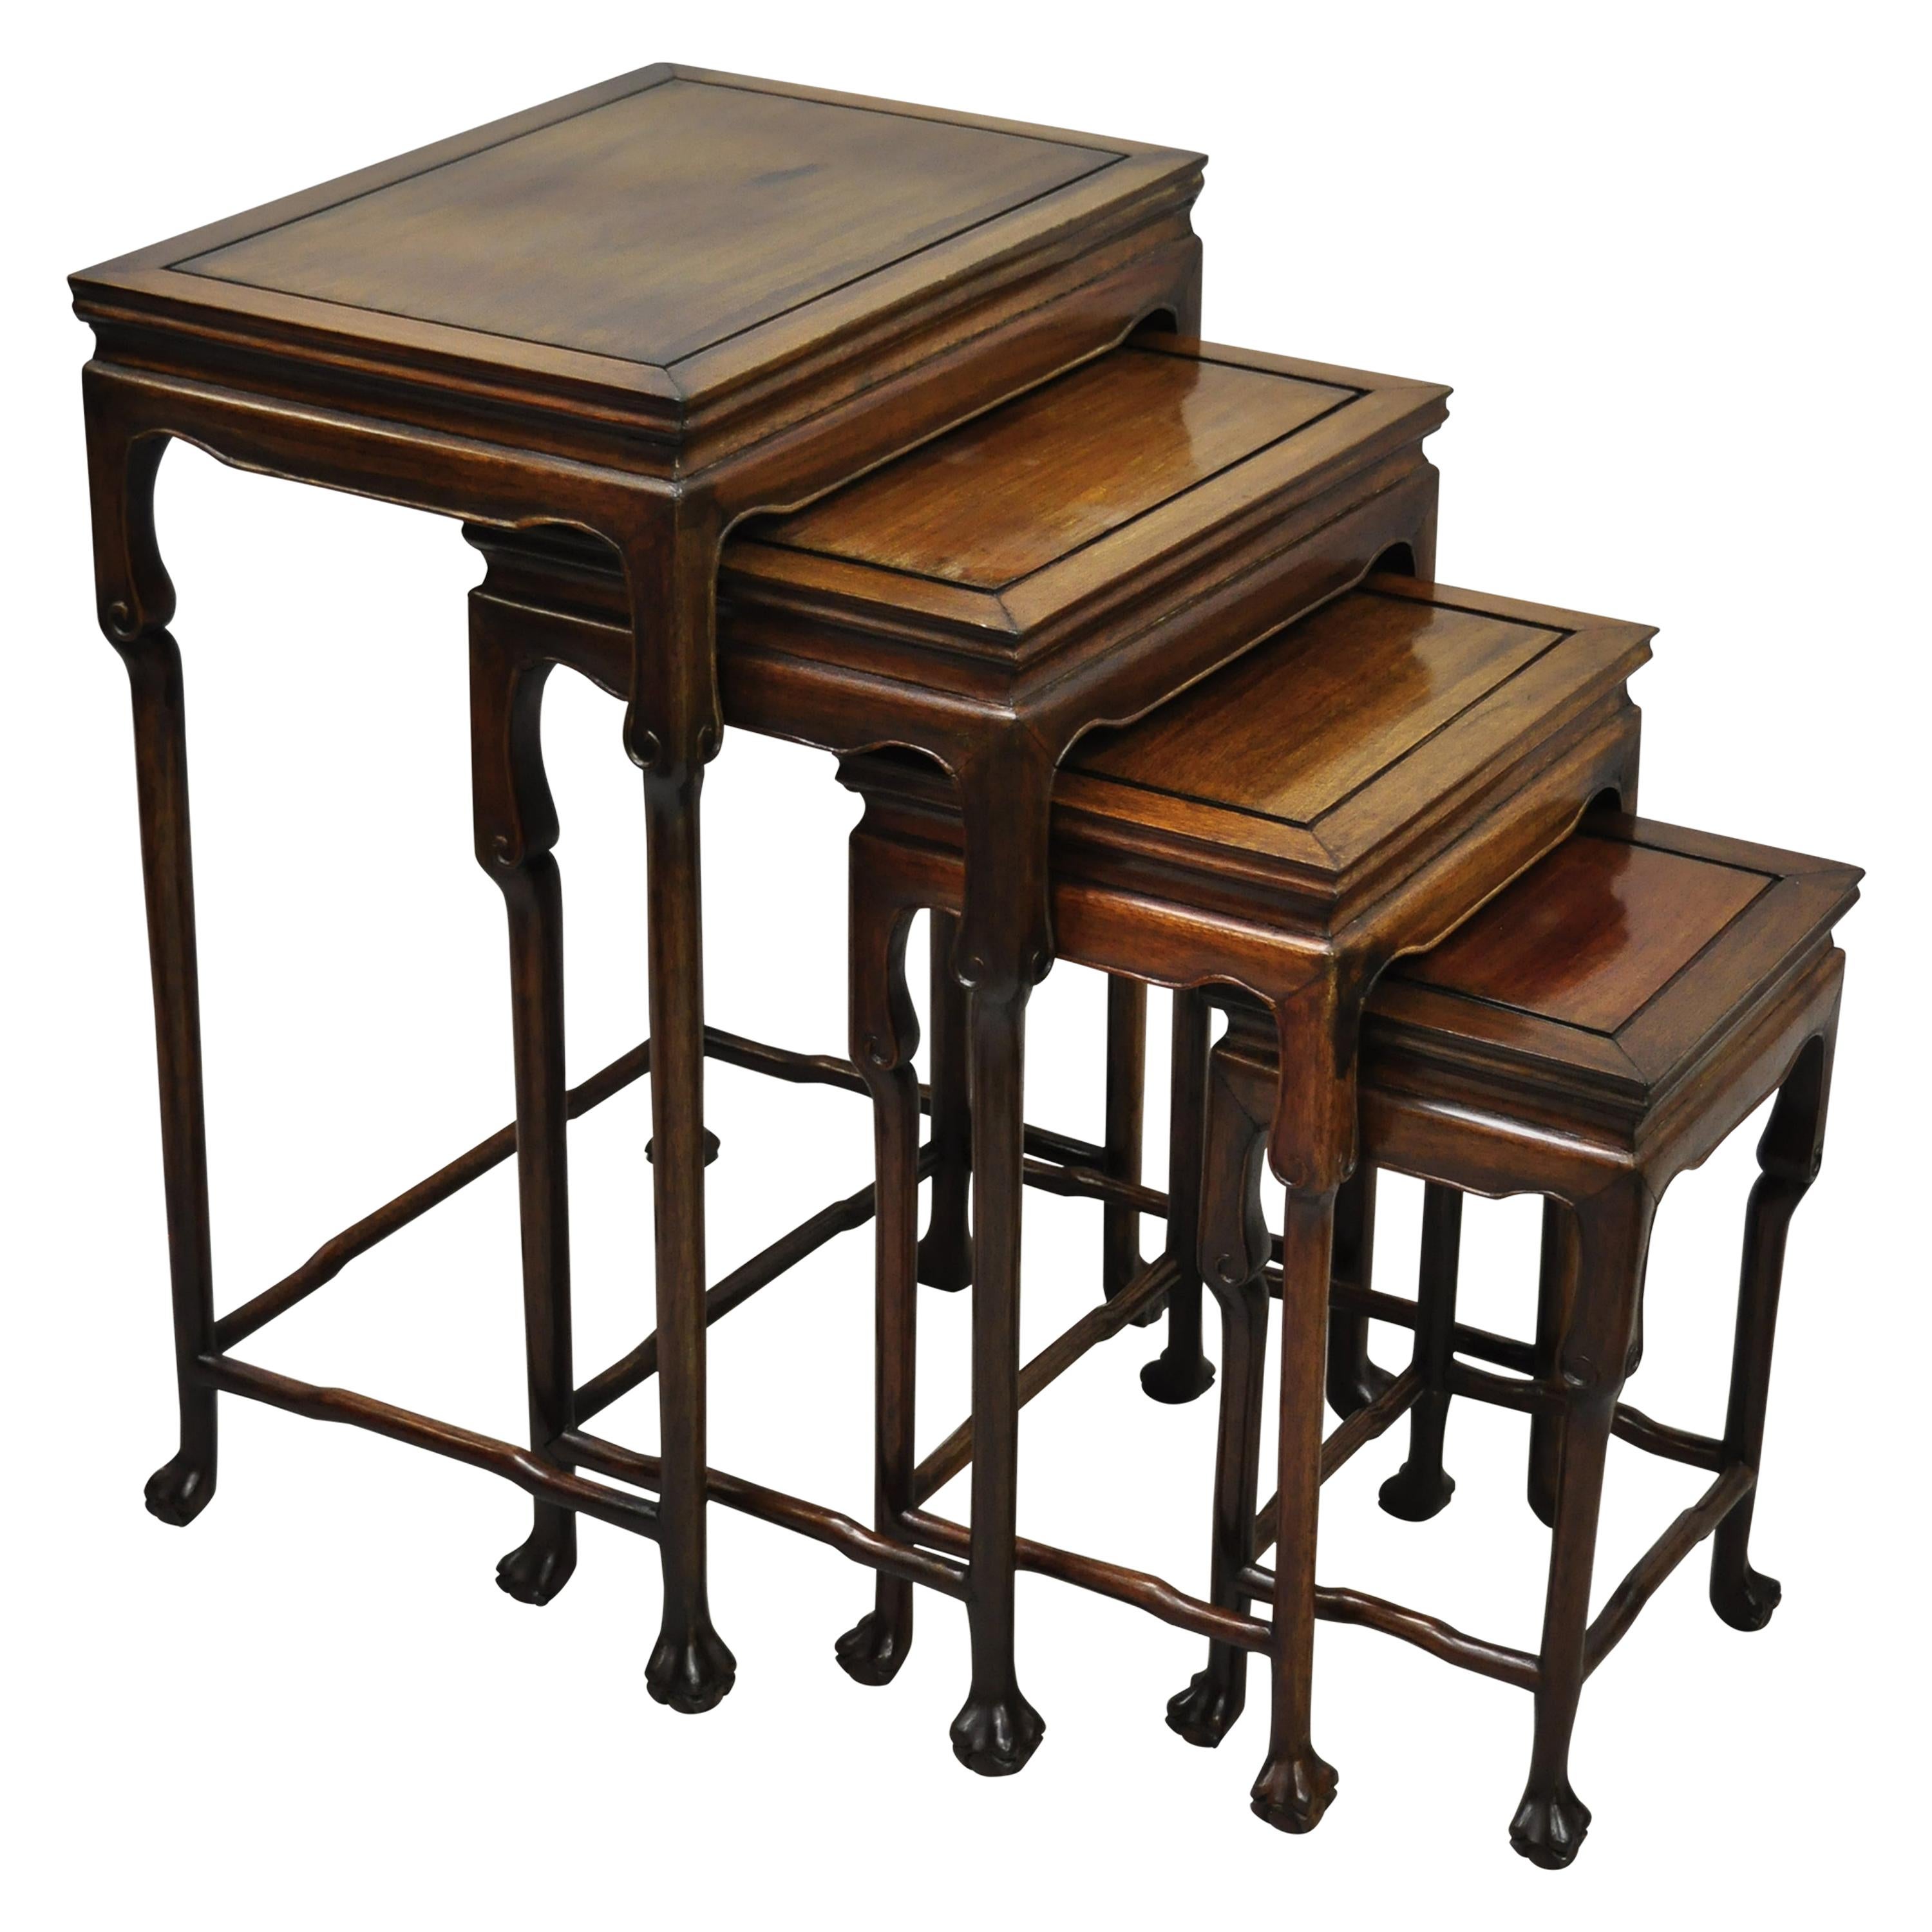 4 Vintage Chinese Carved Hardwood Rosewood Nesting Side Tables with Paw Feet